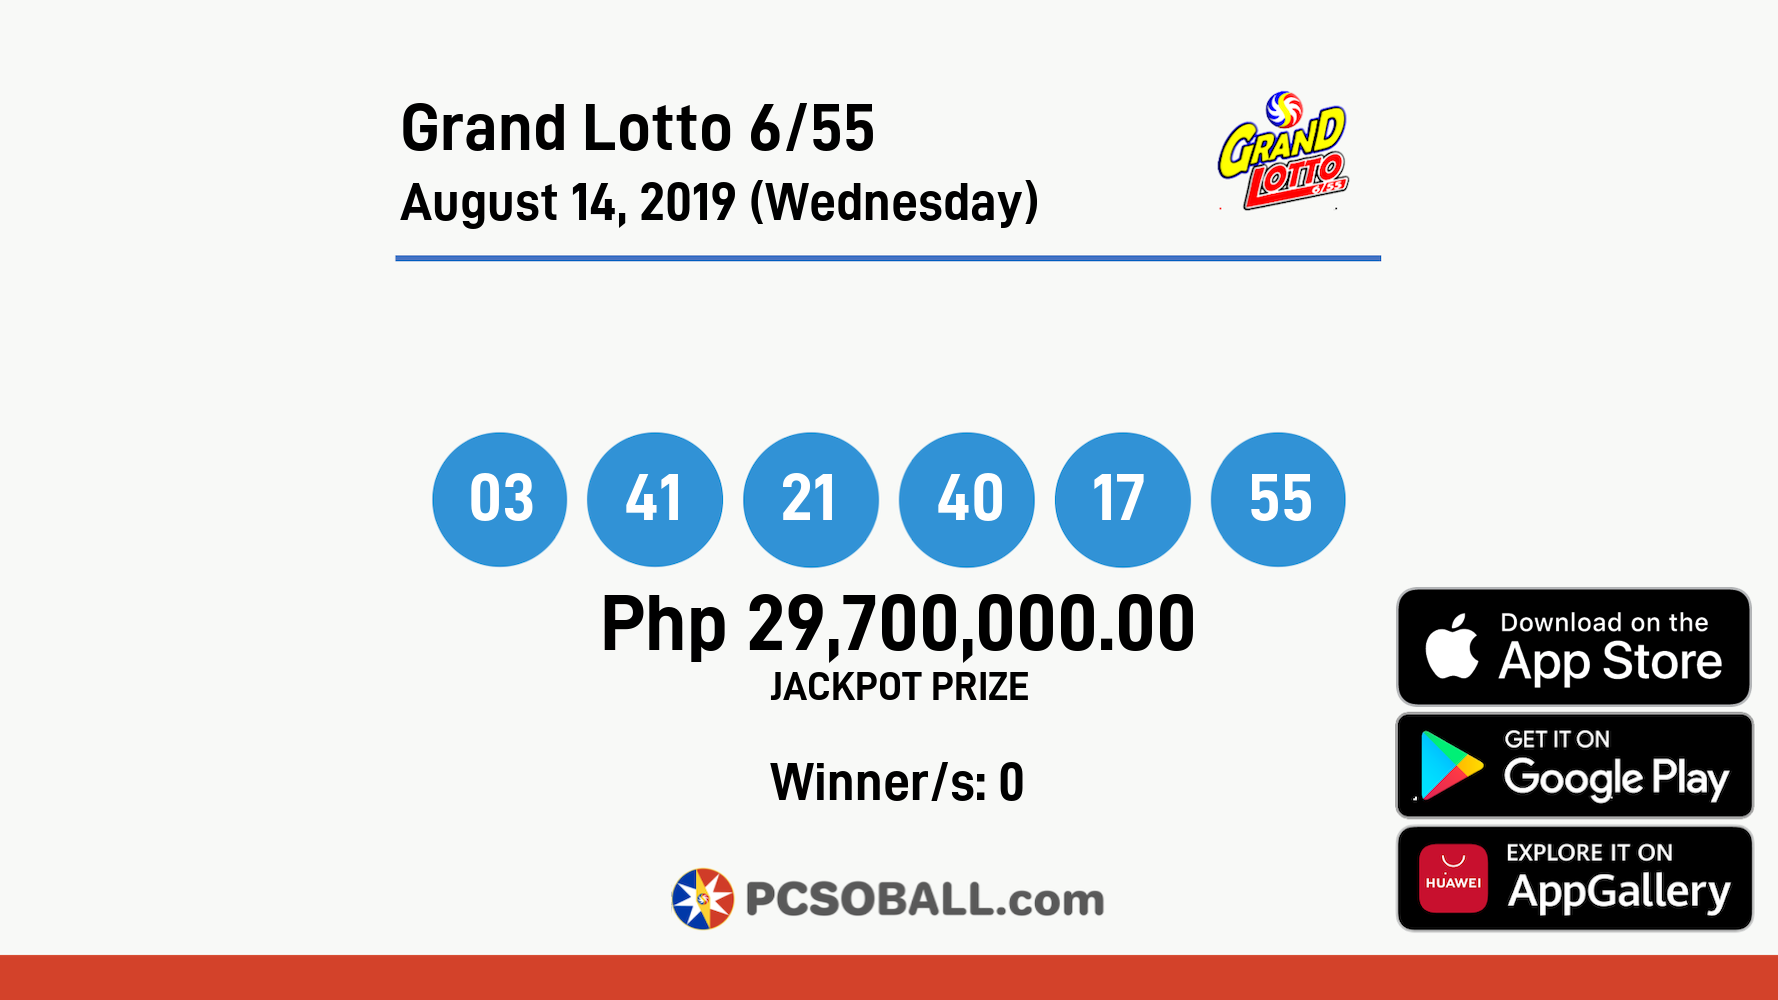 Grand Lotto 6/55 August 14, 2019 (Wednesday) Result